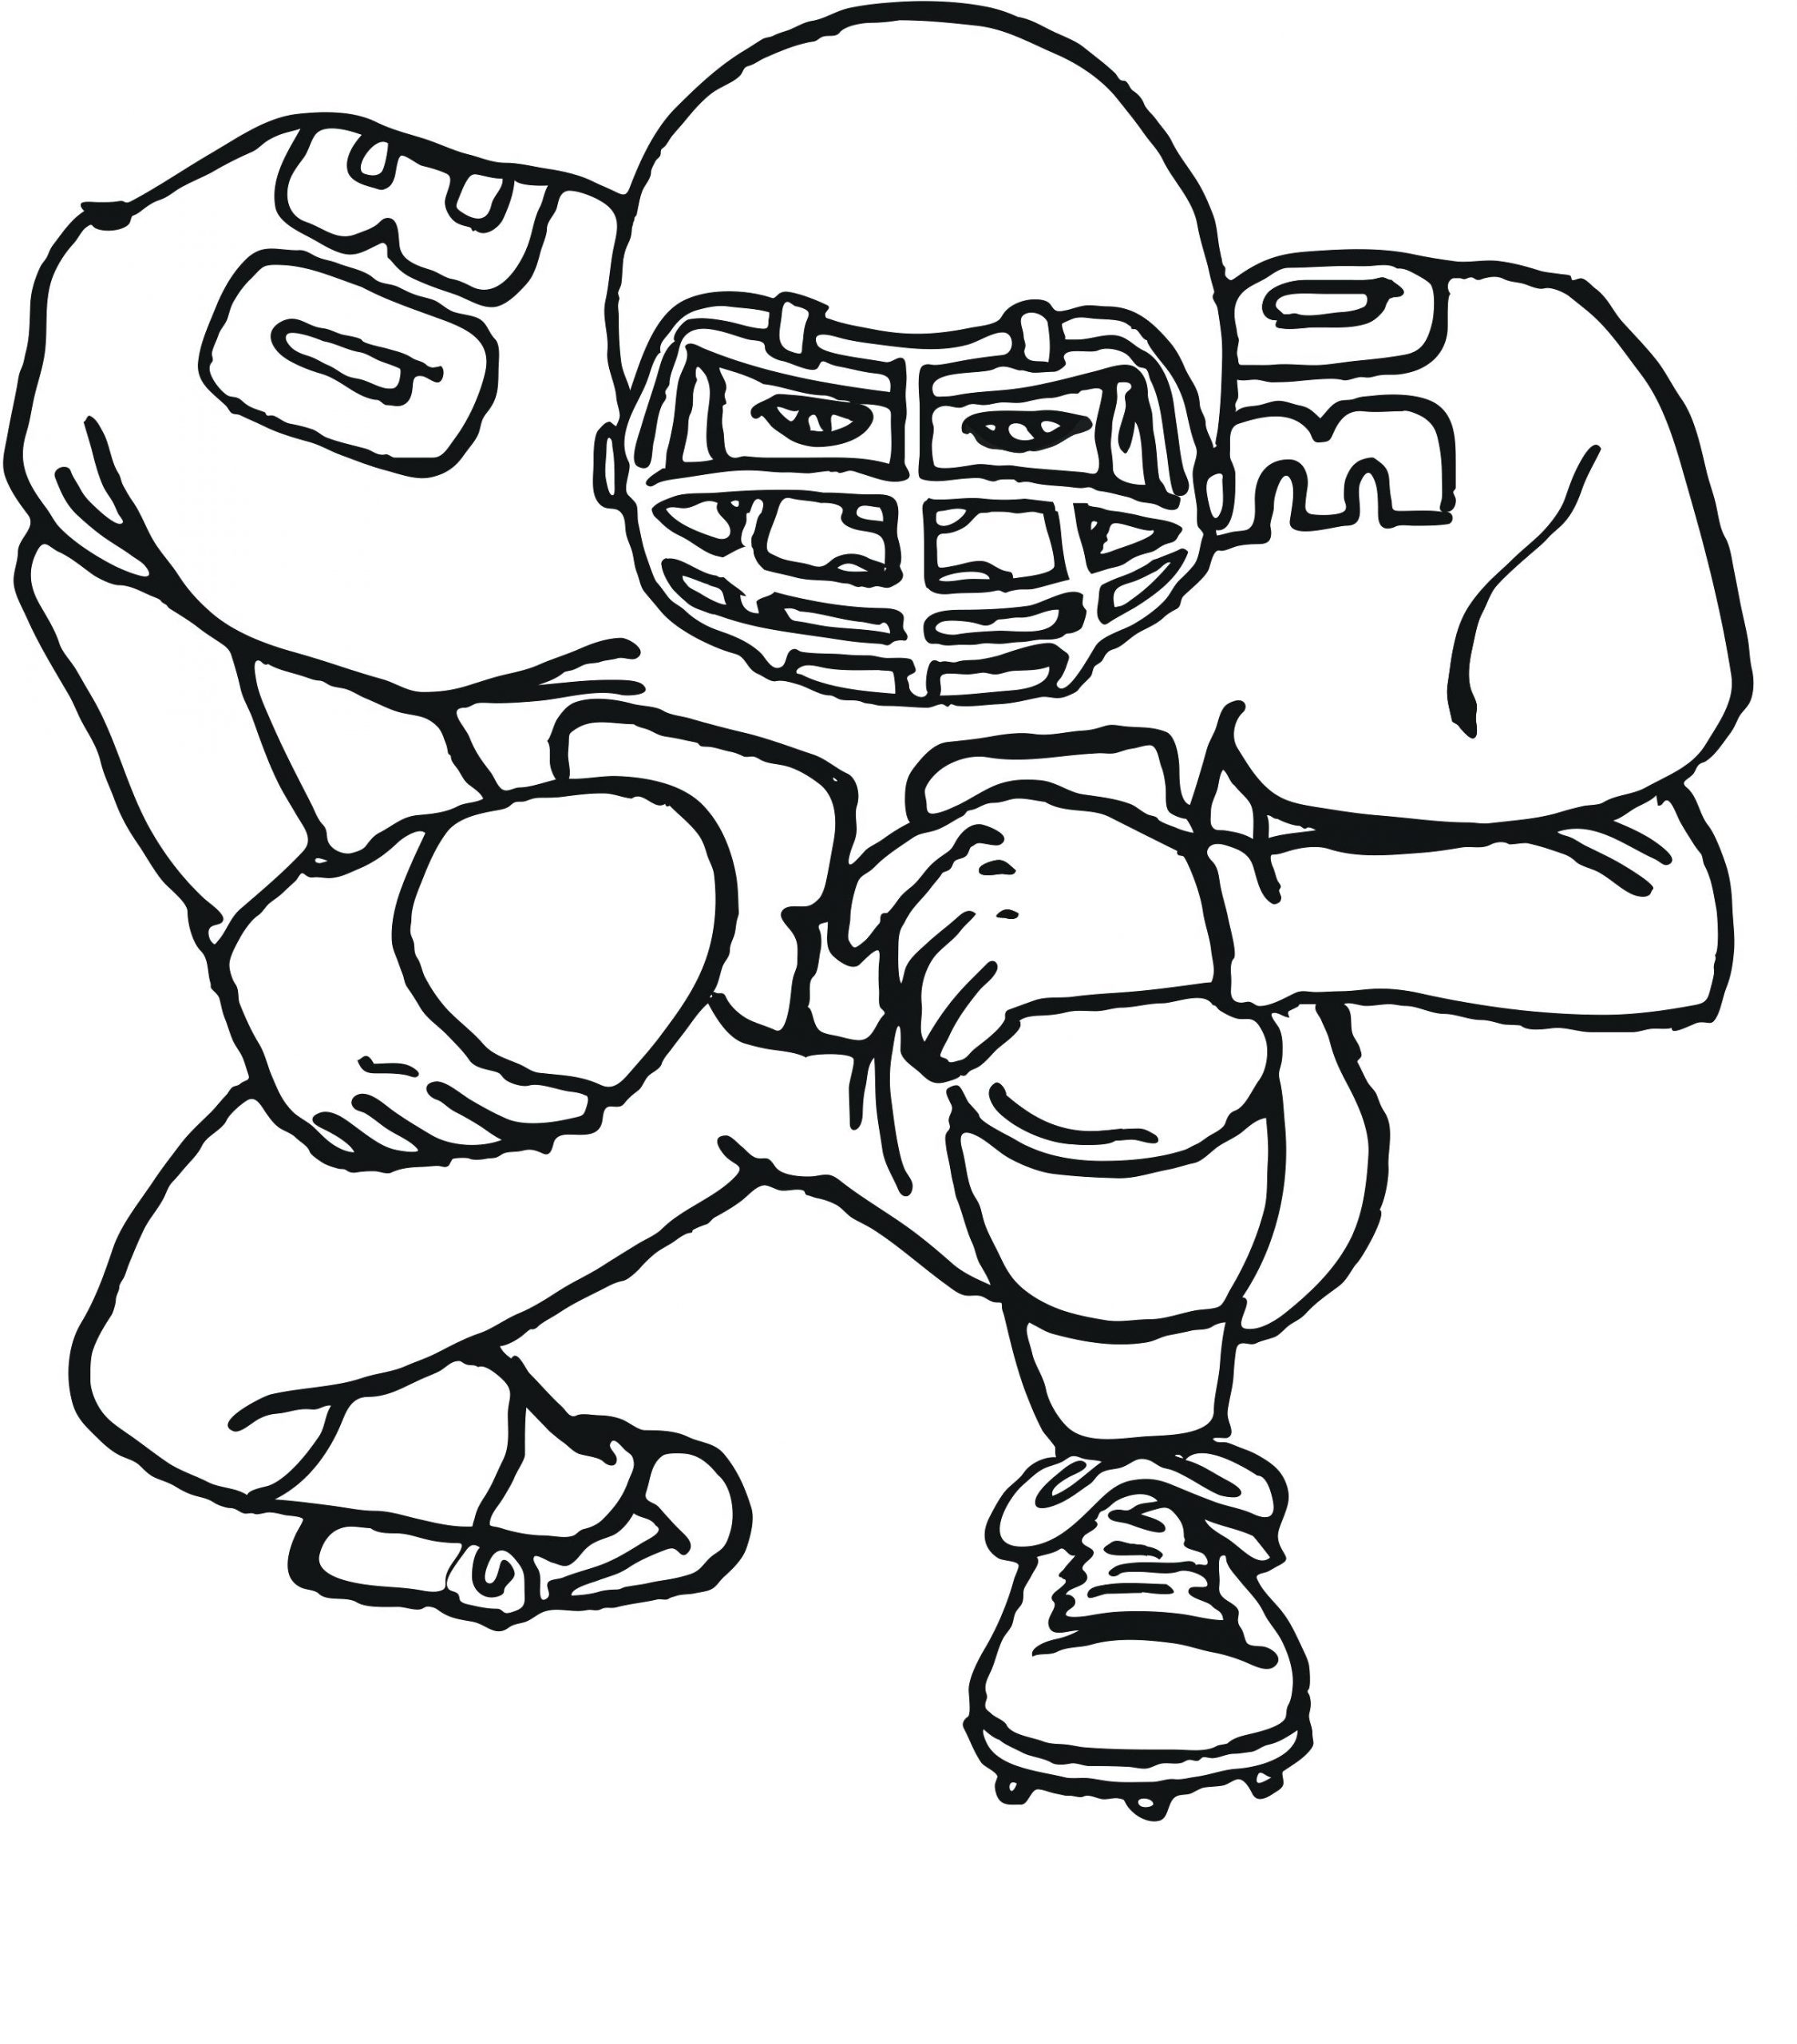 New Coloring Pages : Color Nfl Jersey Football Free Sports ...